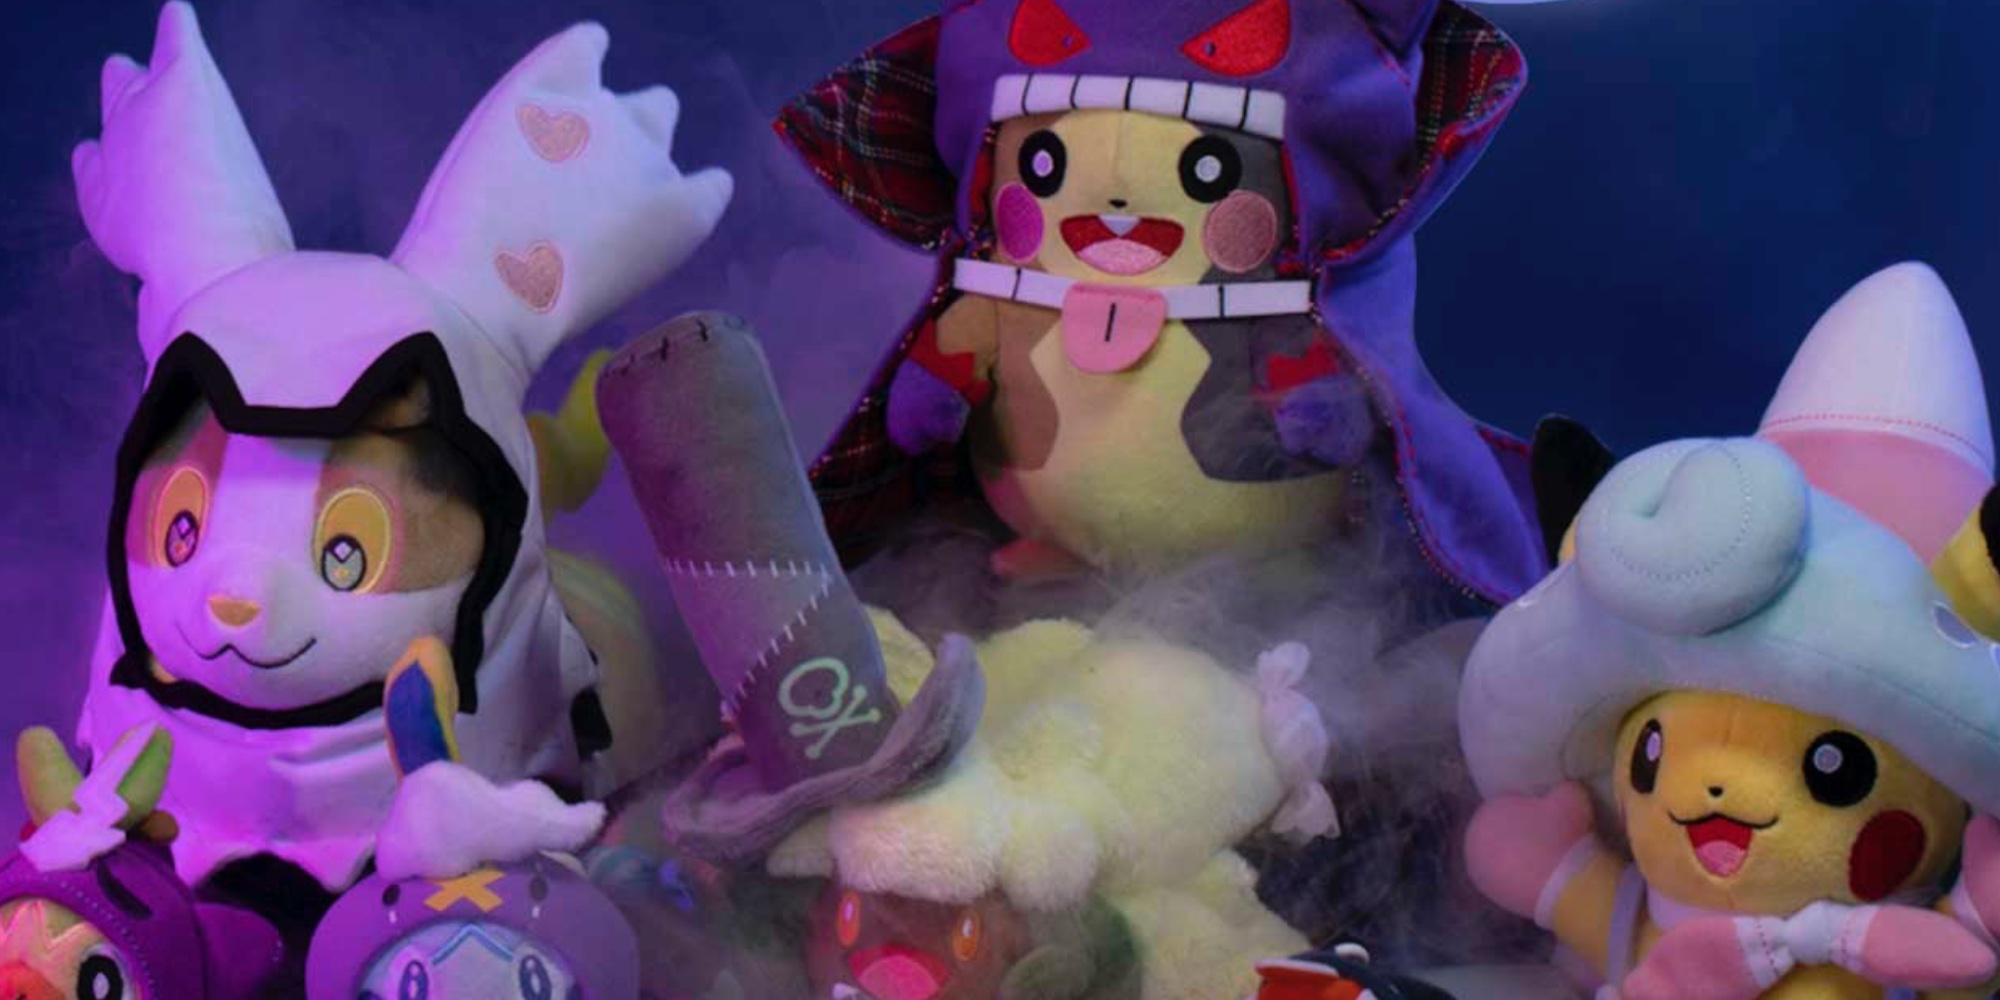 Pokémon Halloween 2021 collection includes musthave merch 9to5Toys